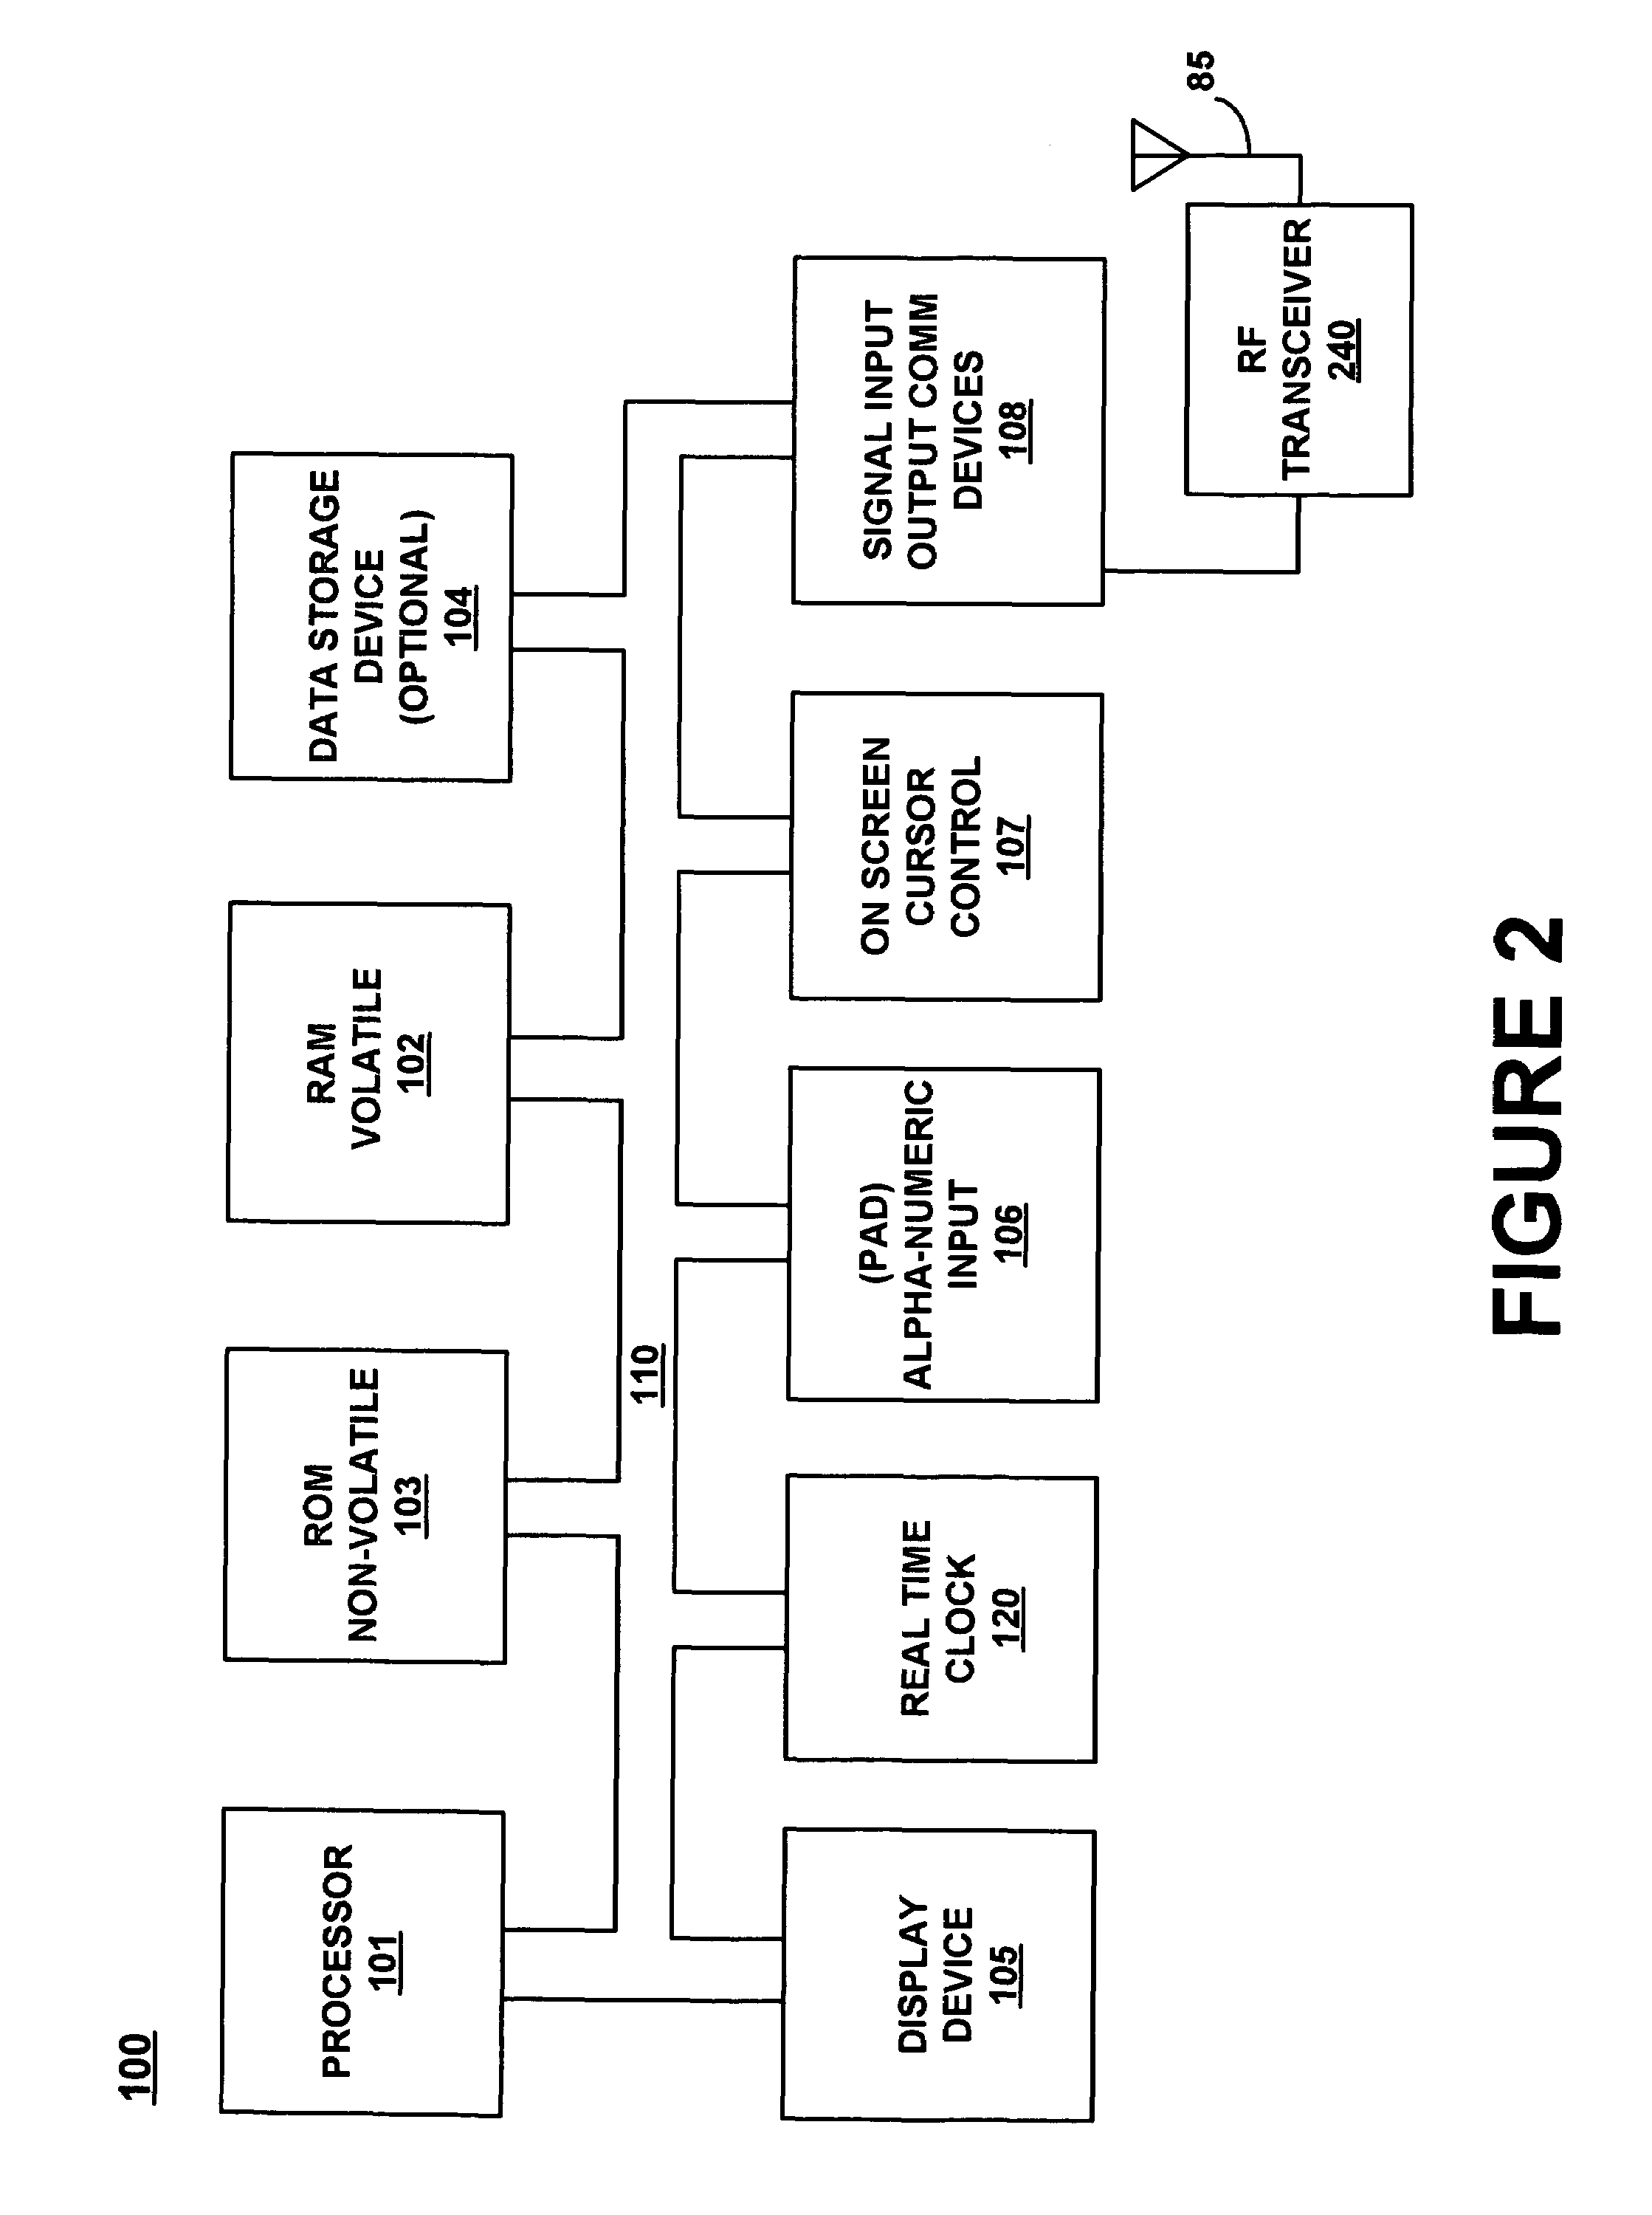 Hand-held device filtering